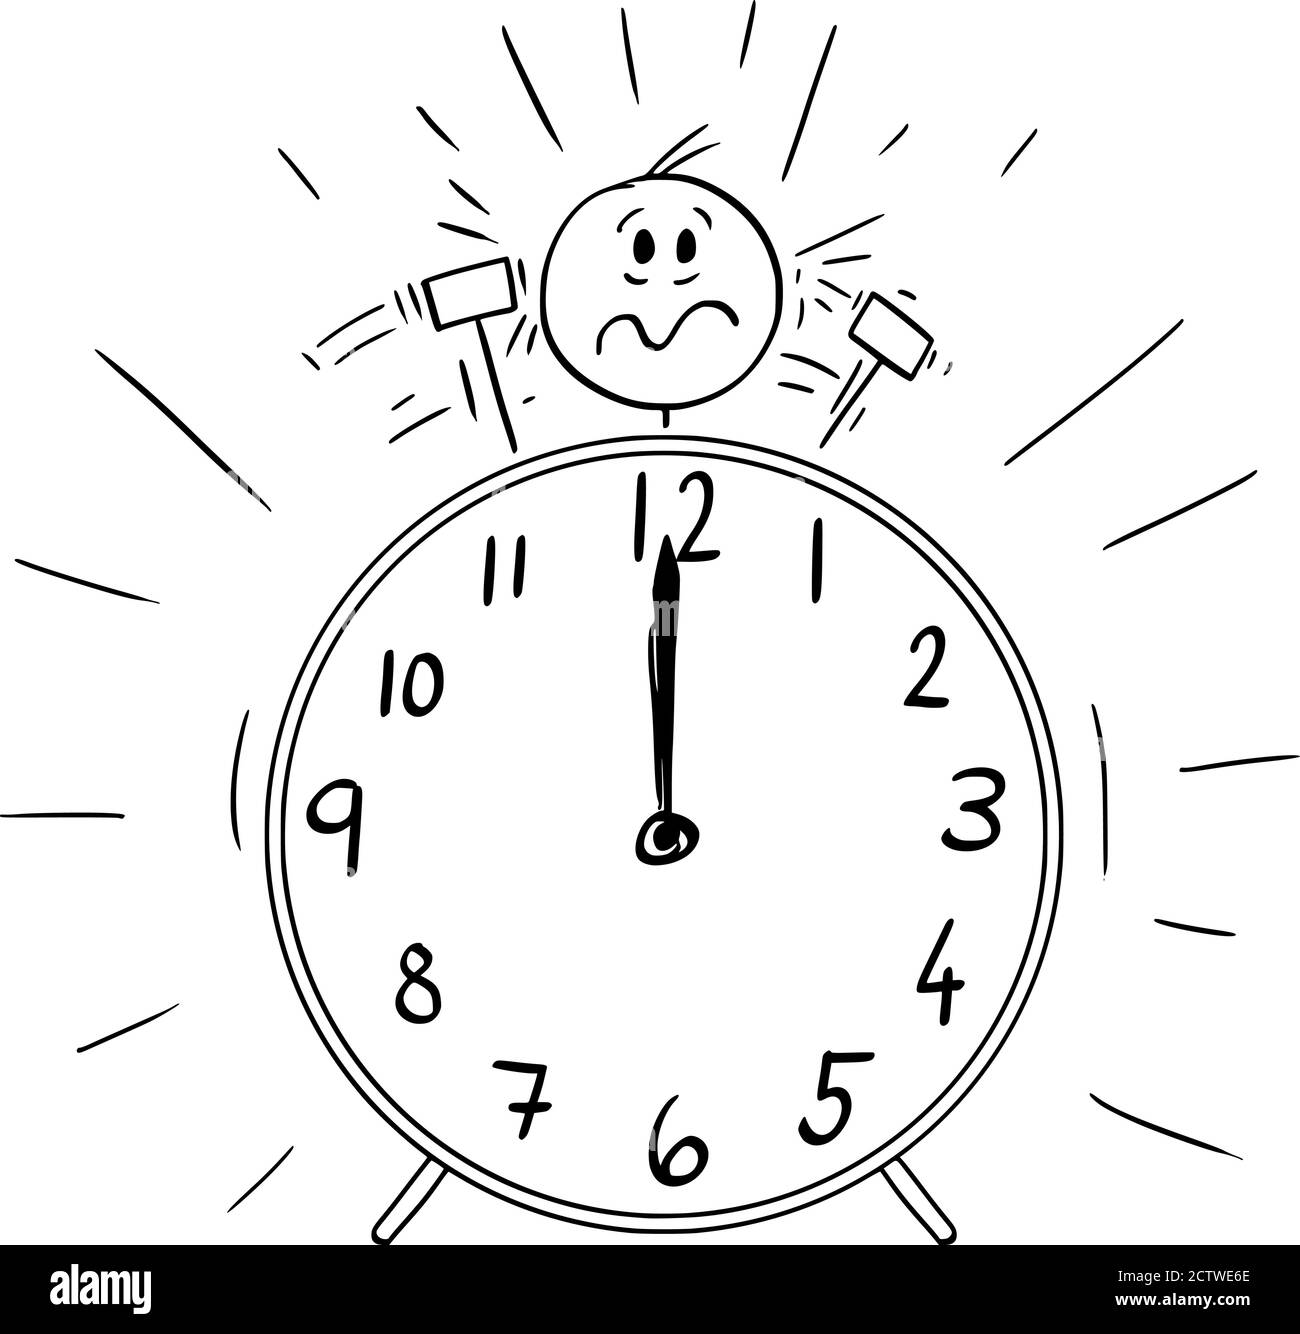 Vector cartoon stick figure drawing conceptual illustration of frustrated or stressed man or businessman. His head is as the bell of ringing alarm clock. Hammers are hitting or beating him. Wake up or deadline concept. Stock Vector